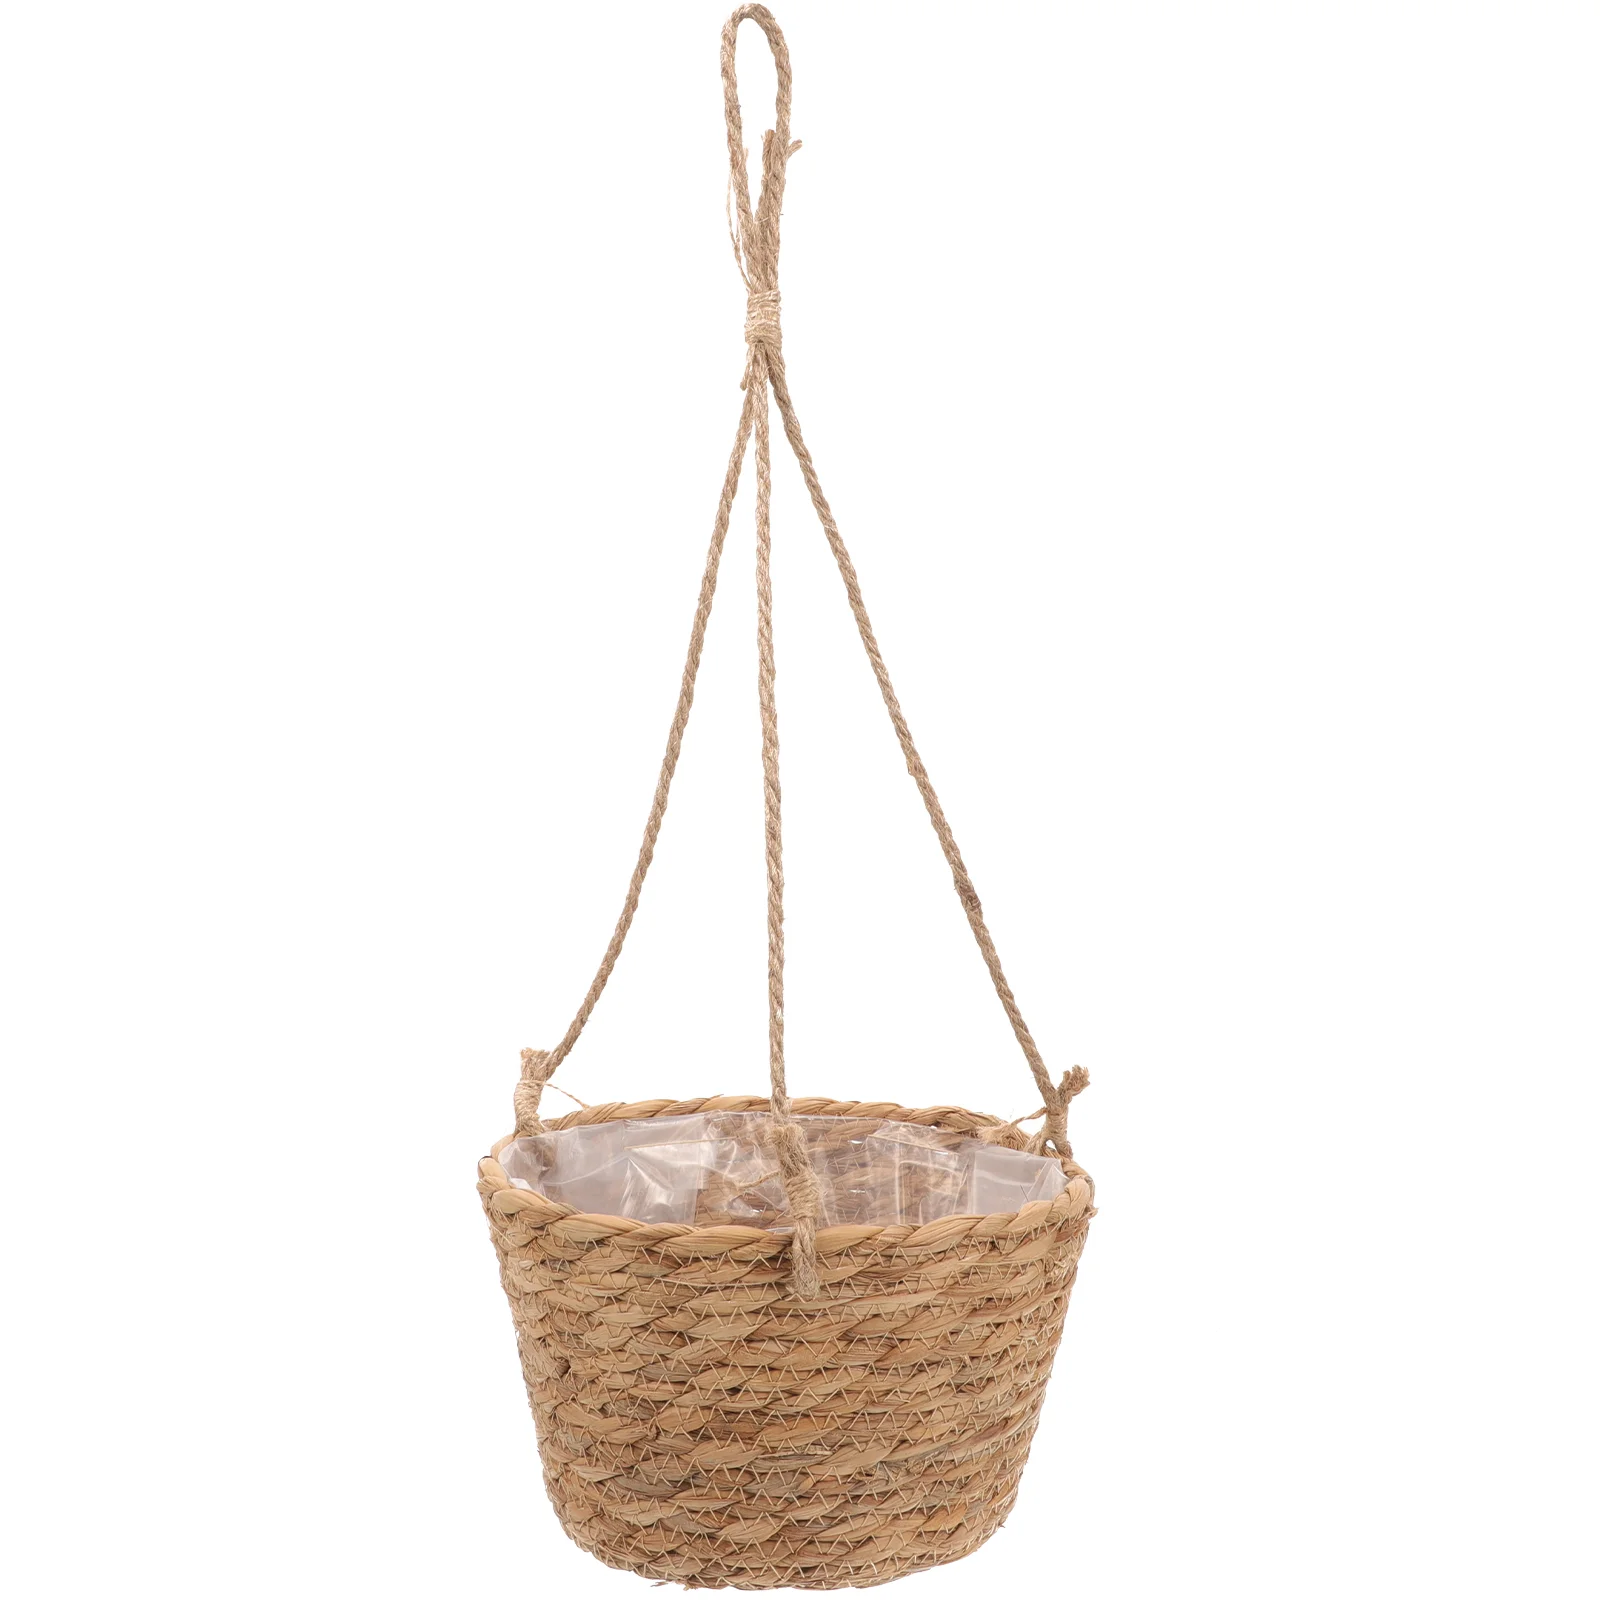 

Orchid Hanging Basket Hangers Plants Outdoor Grower Pots Small Baskets Straw Home Decor